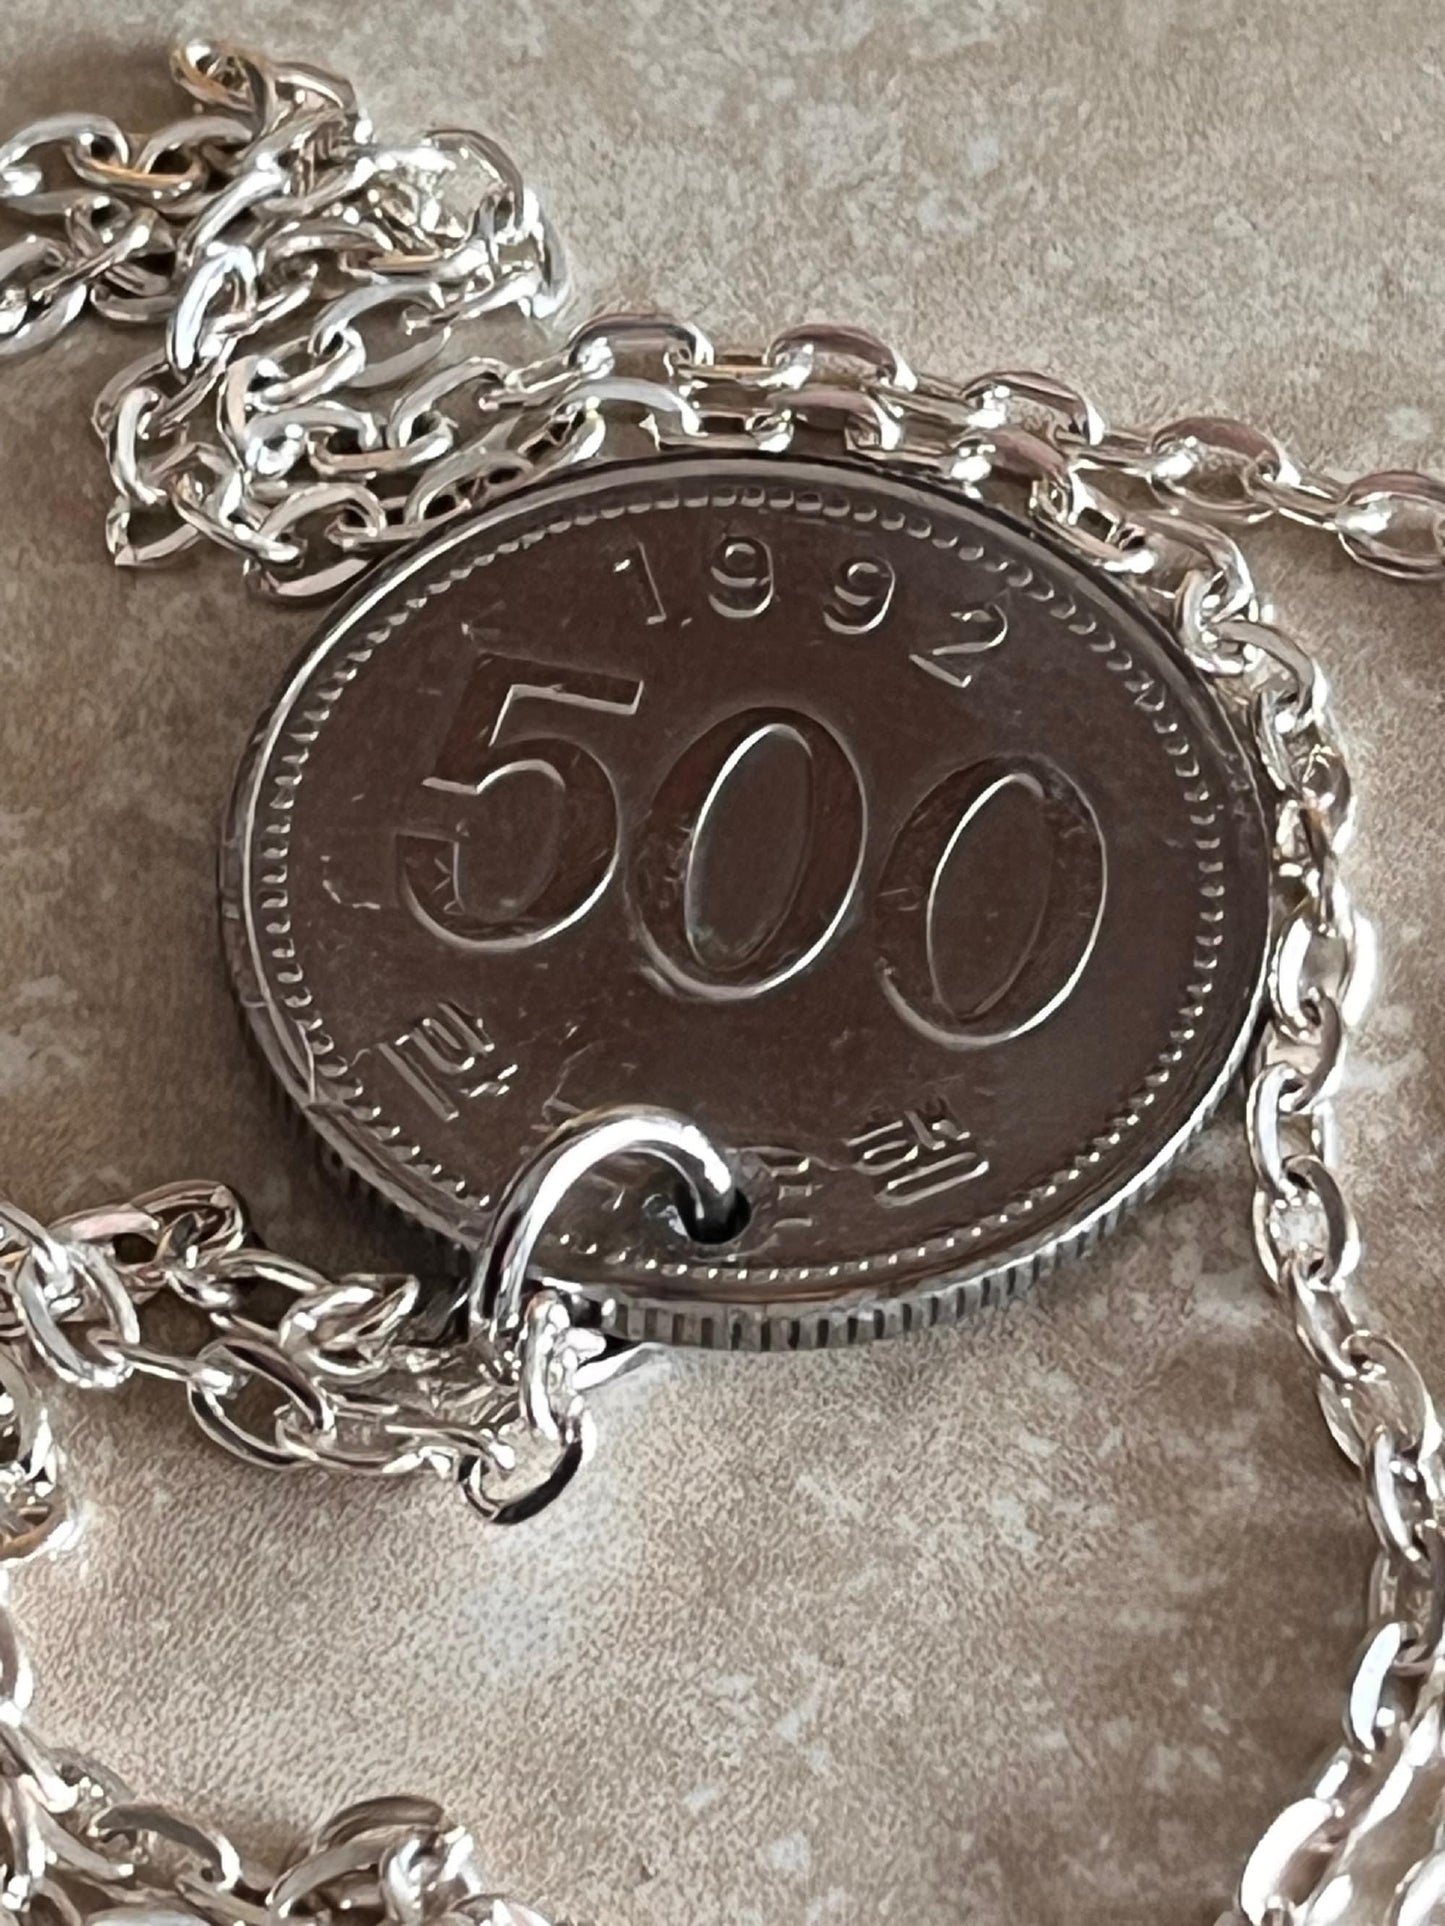 China Coin Necklace Asian 500 Yen Pendant Custom Personal Old Vintage Handmade Jewelry Gift Friend Charm For Him Her World Coin Collector